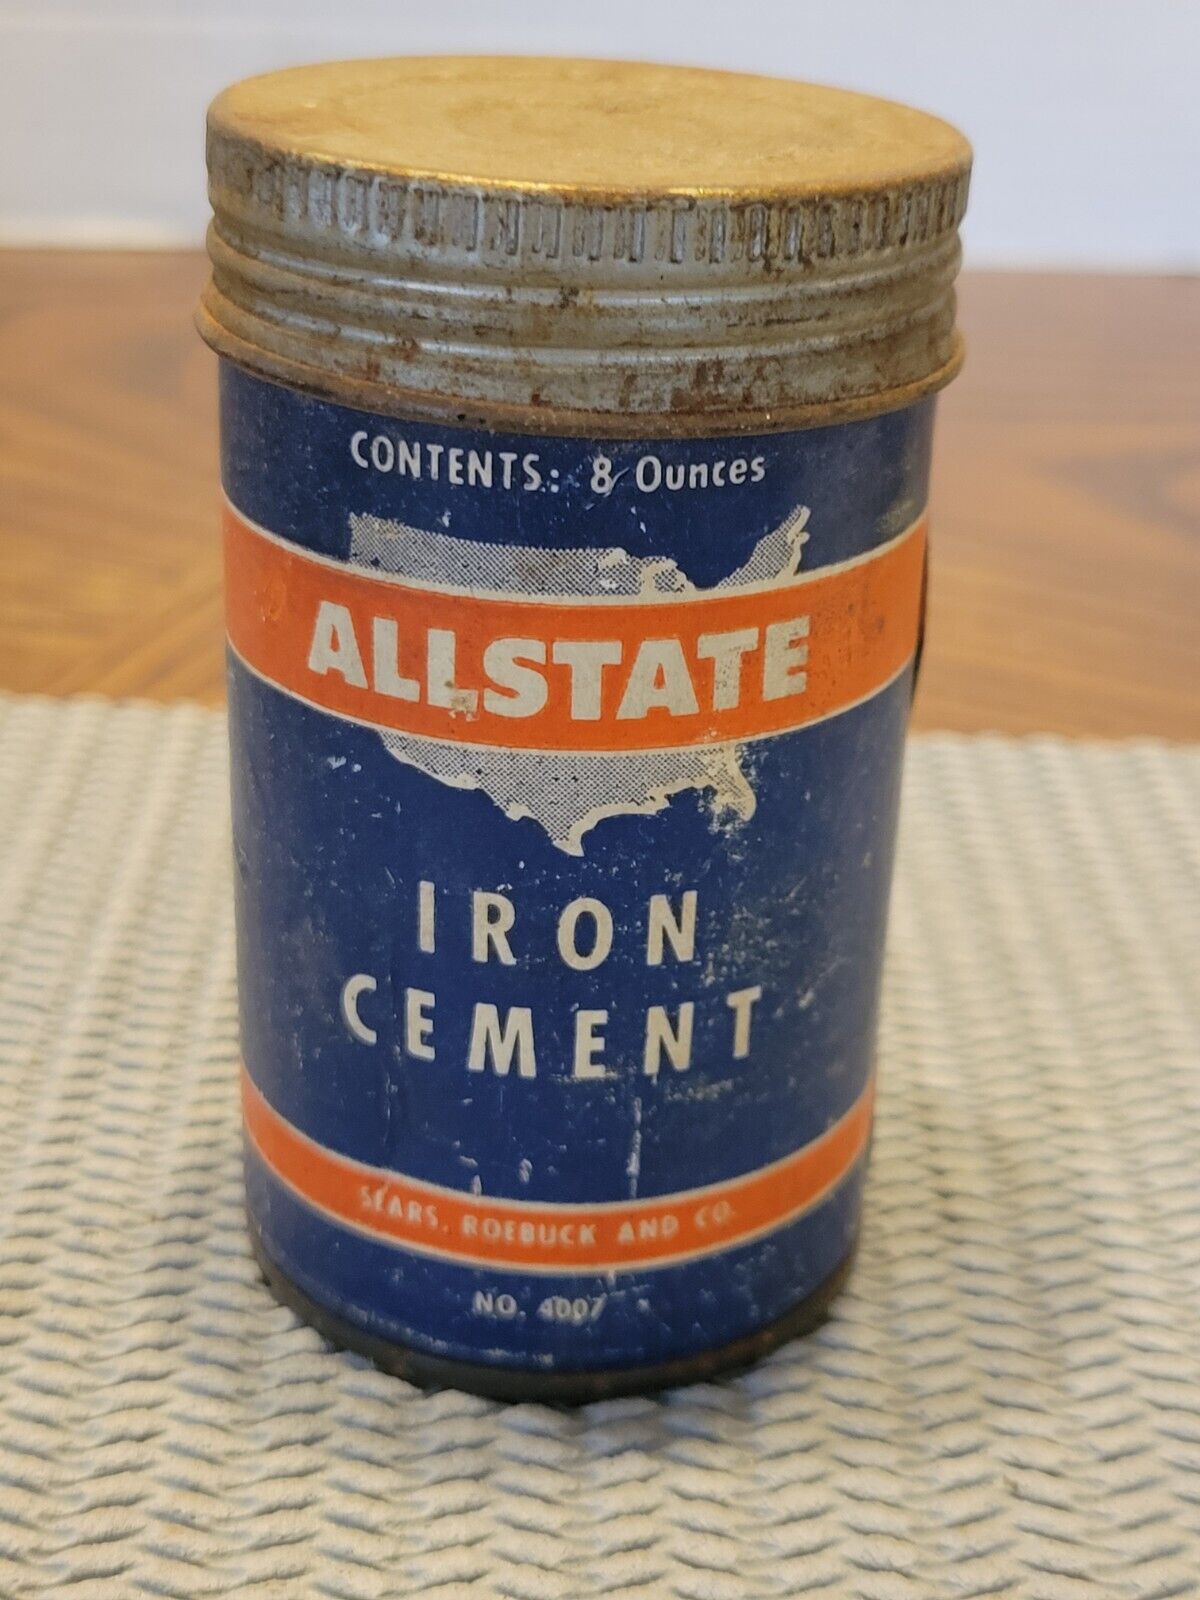 VINTAGE ALLSTATE IRON CEMENT CARDBOARD CAN FULL